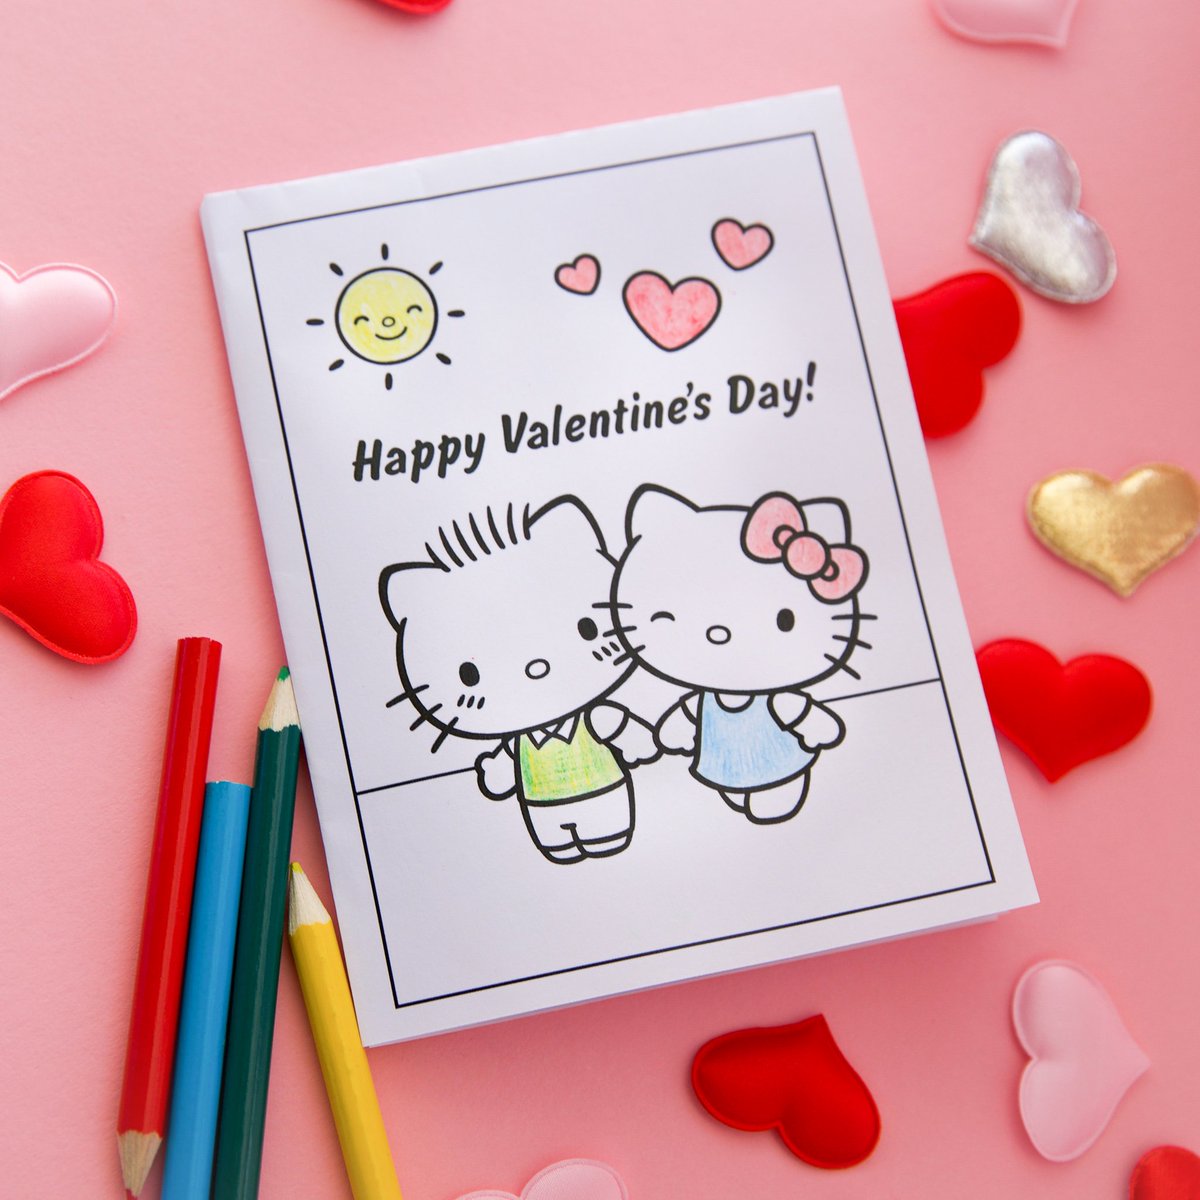 Hello Kitty on X: Send a sweet note 💌 Download and color your